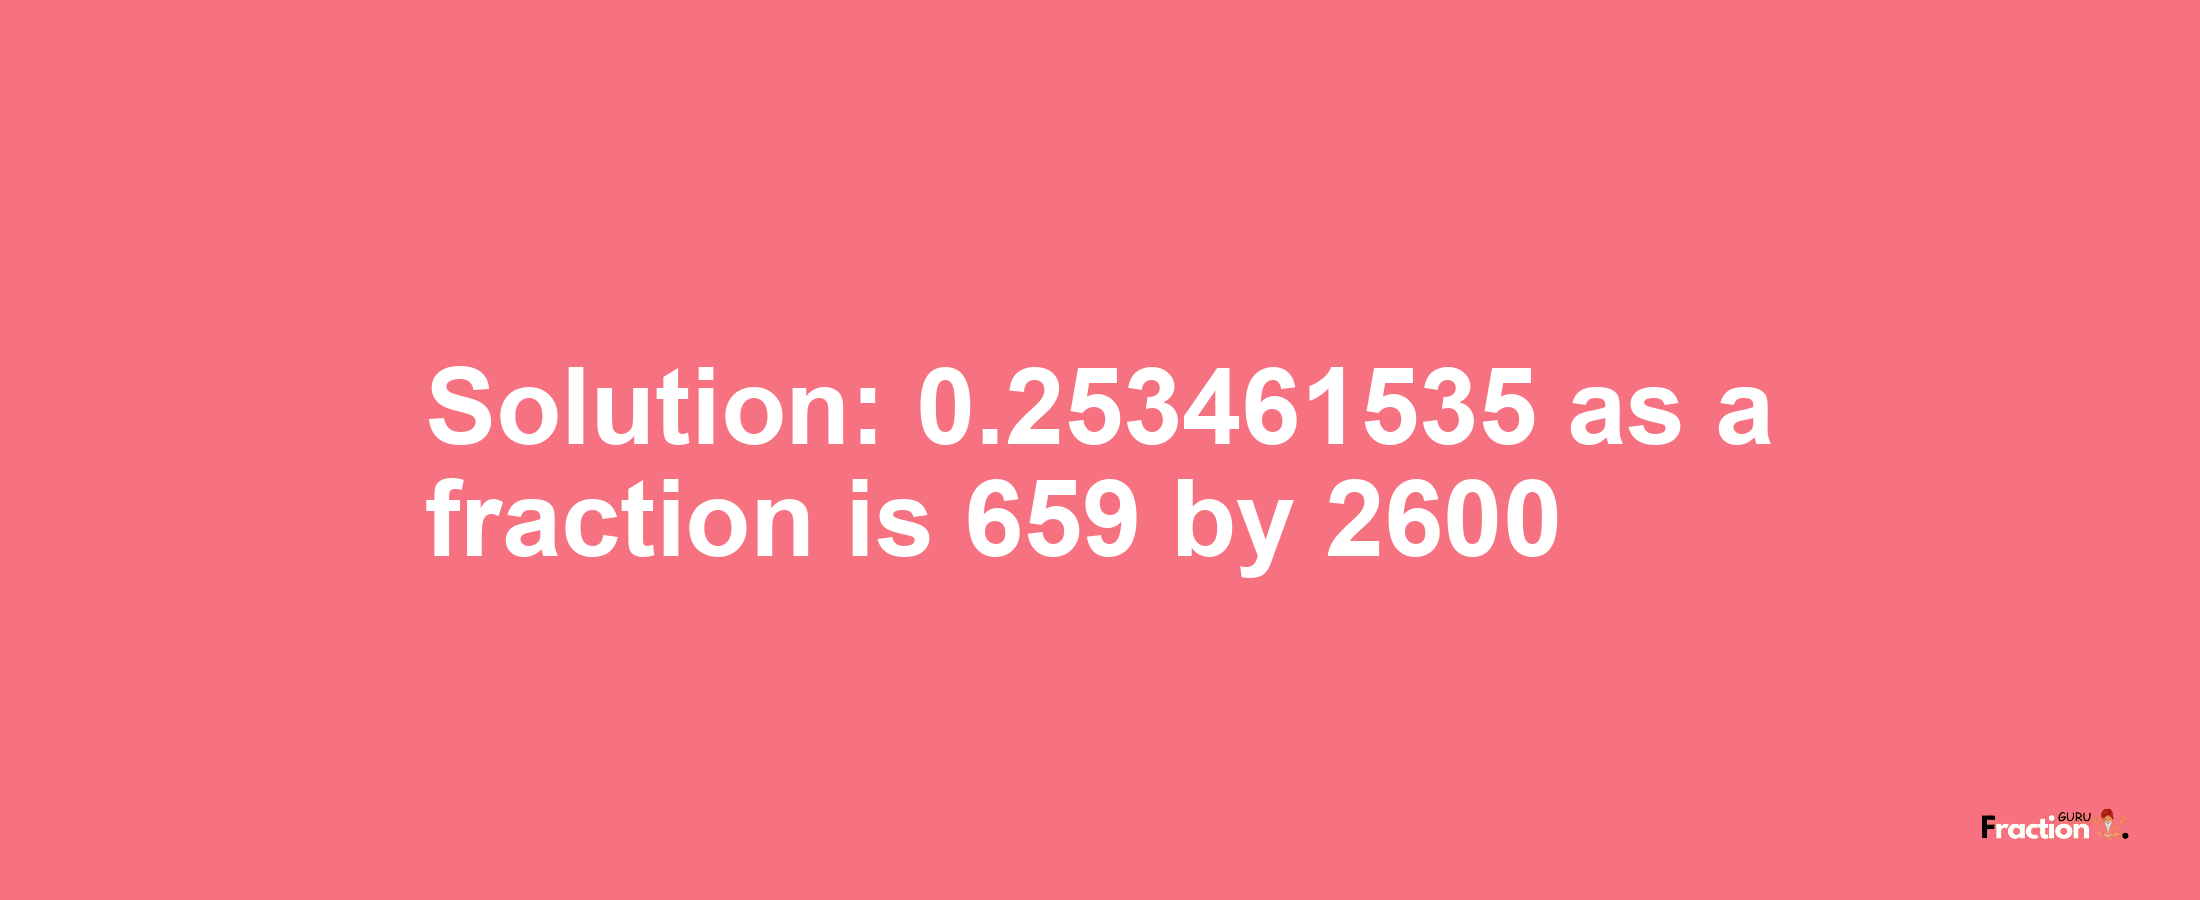 Solution:0.253461535 as a fraction is 659/2600